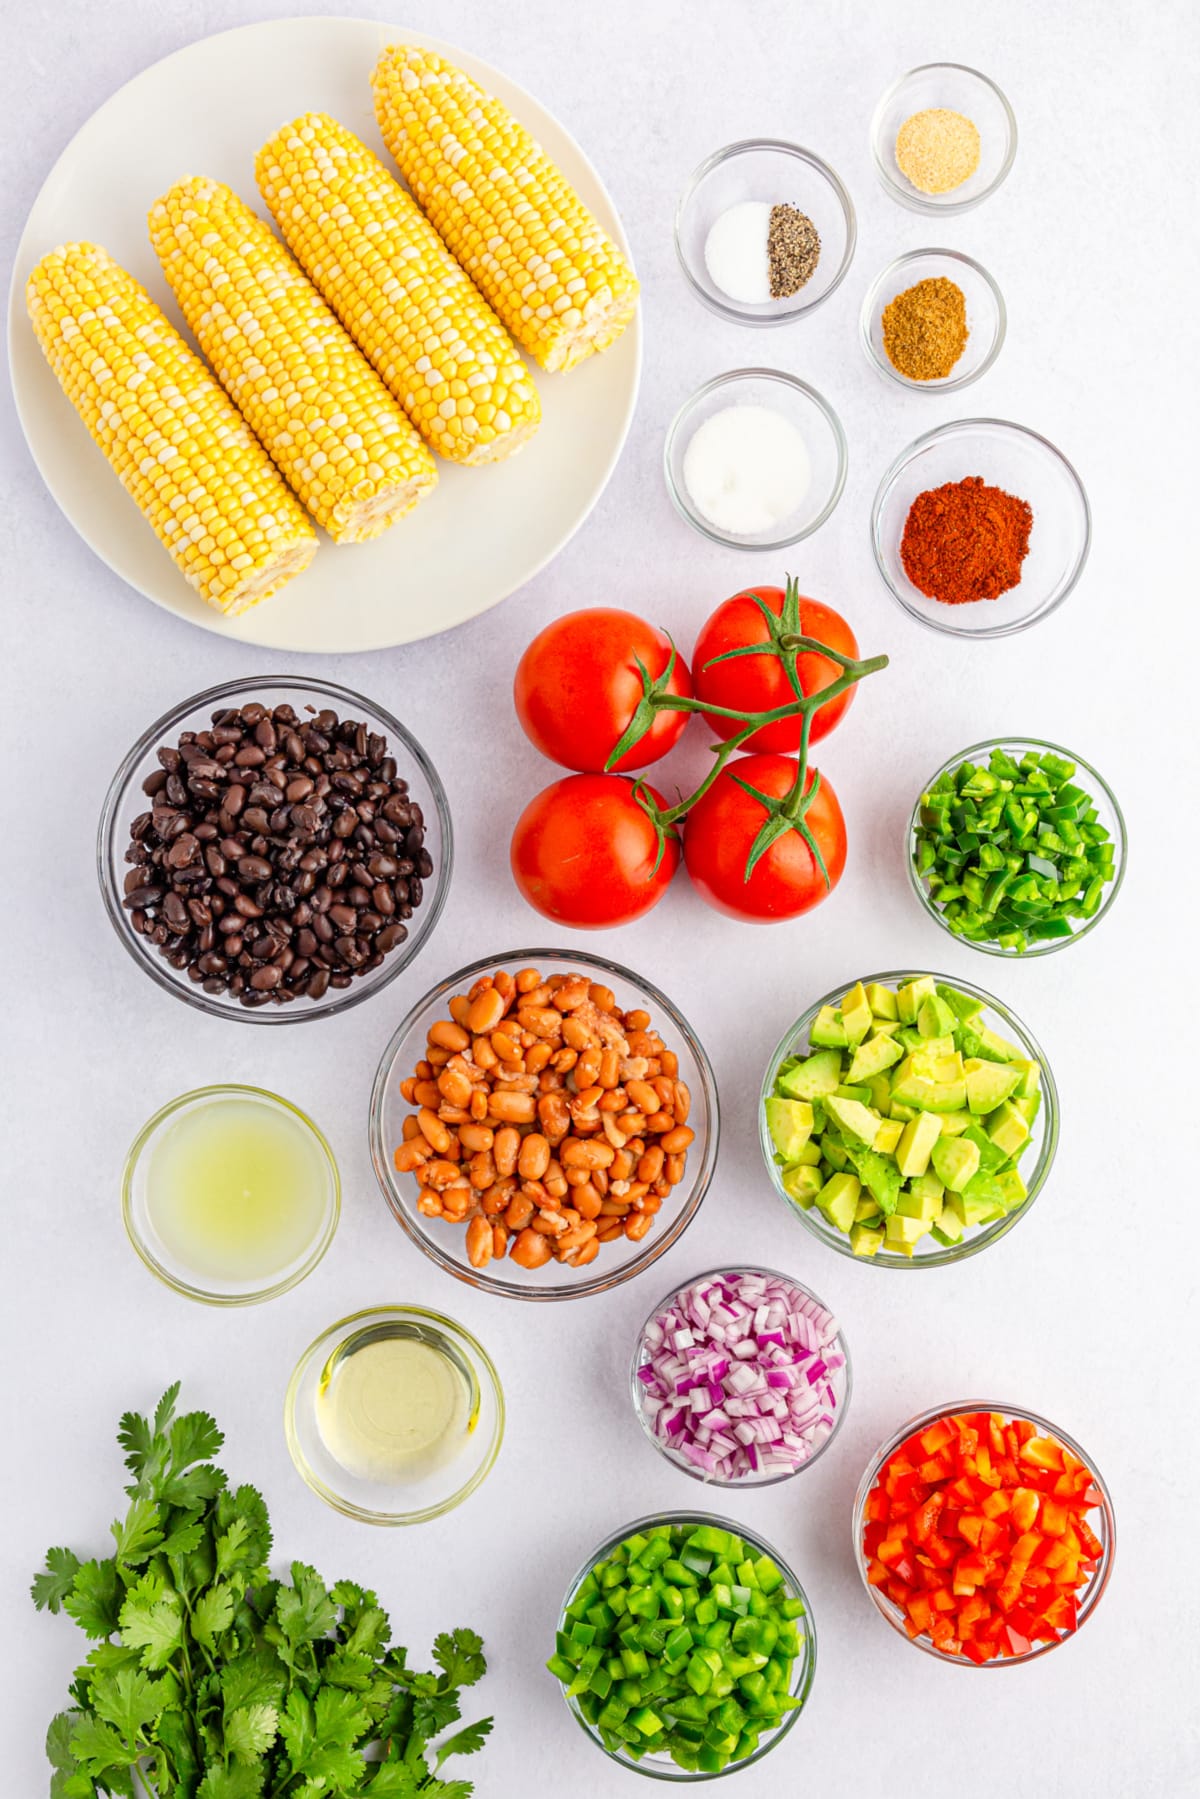 Cowboy Caviar ingredients prepped in bowls